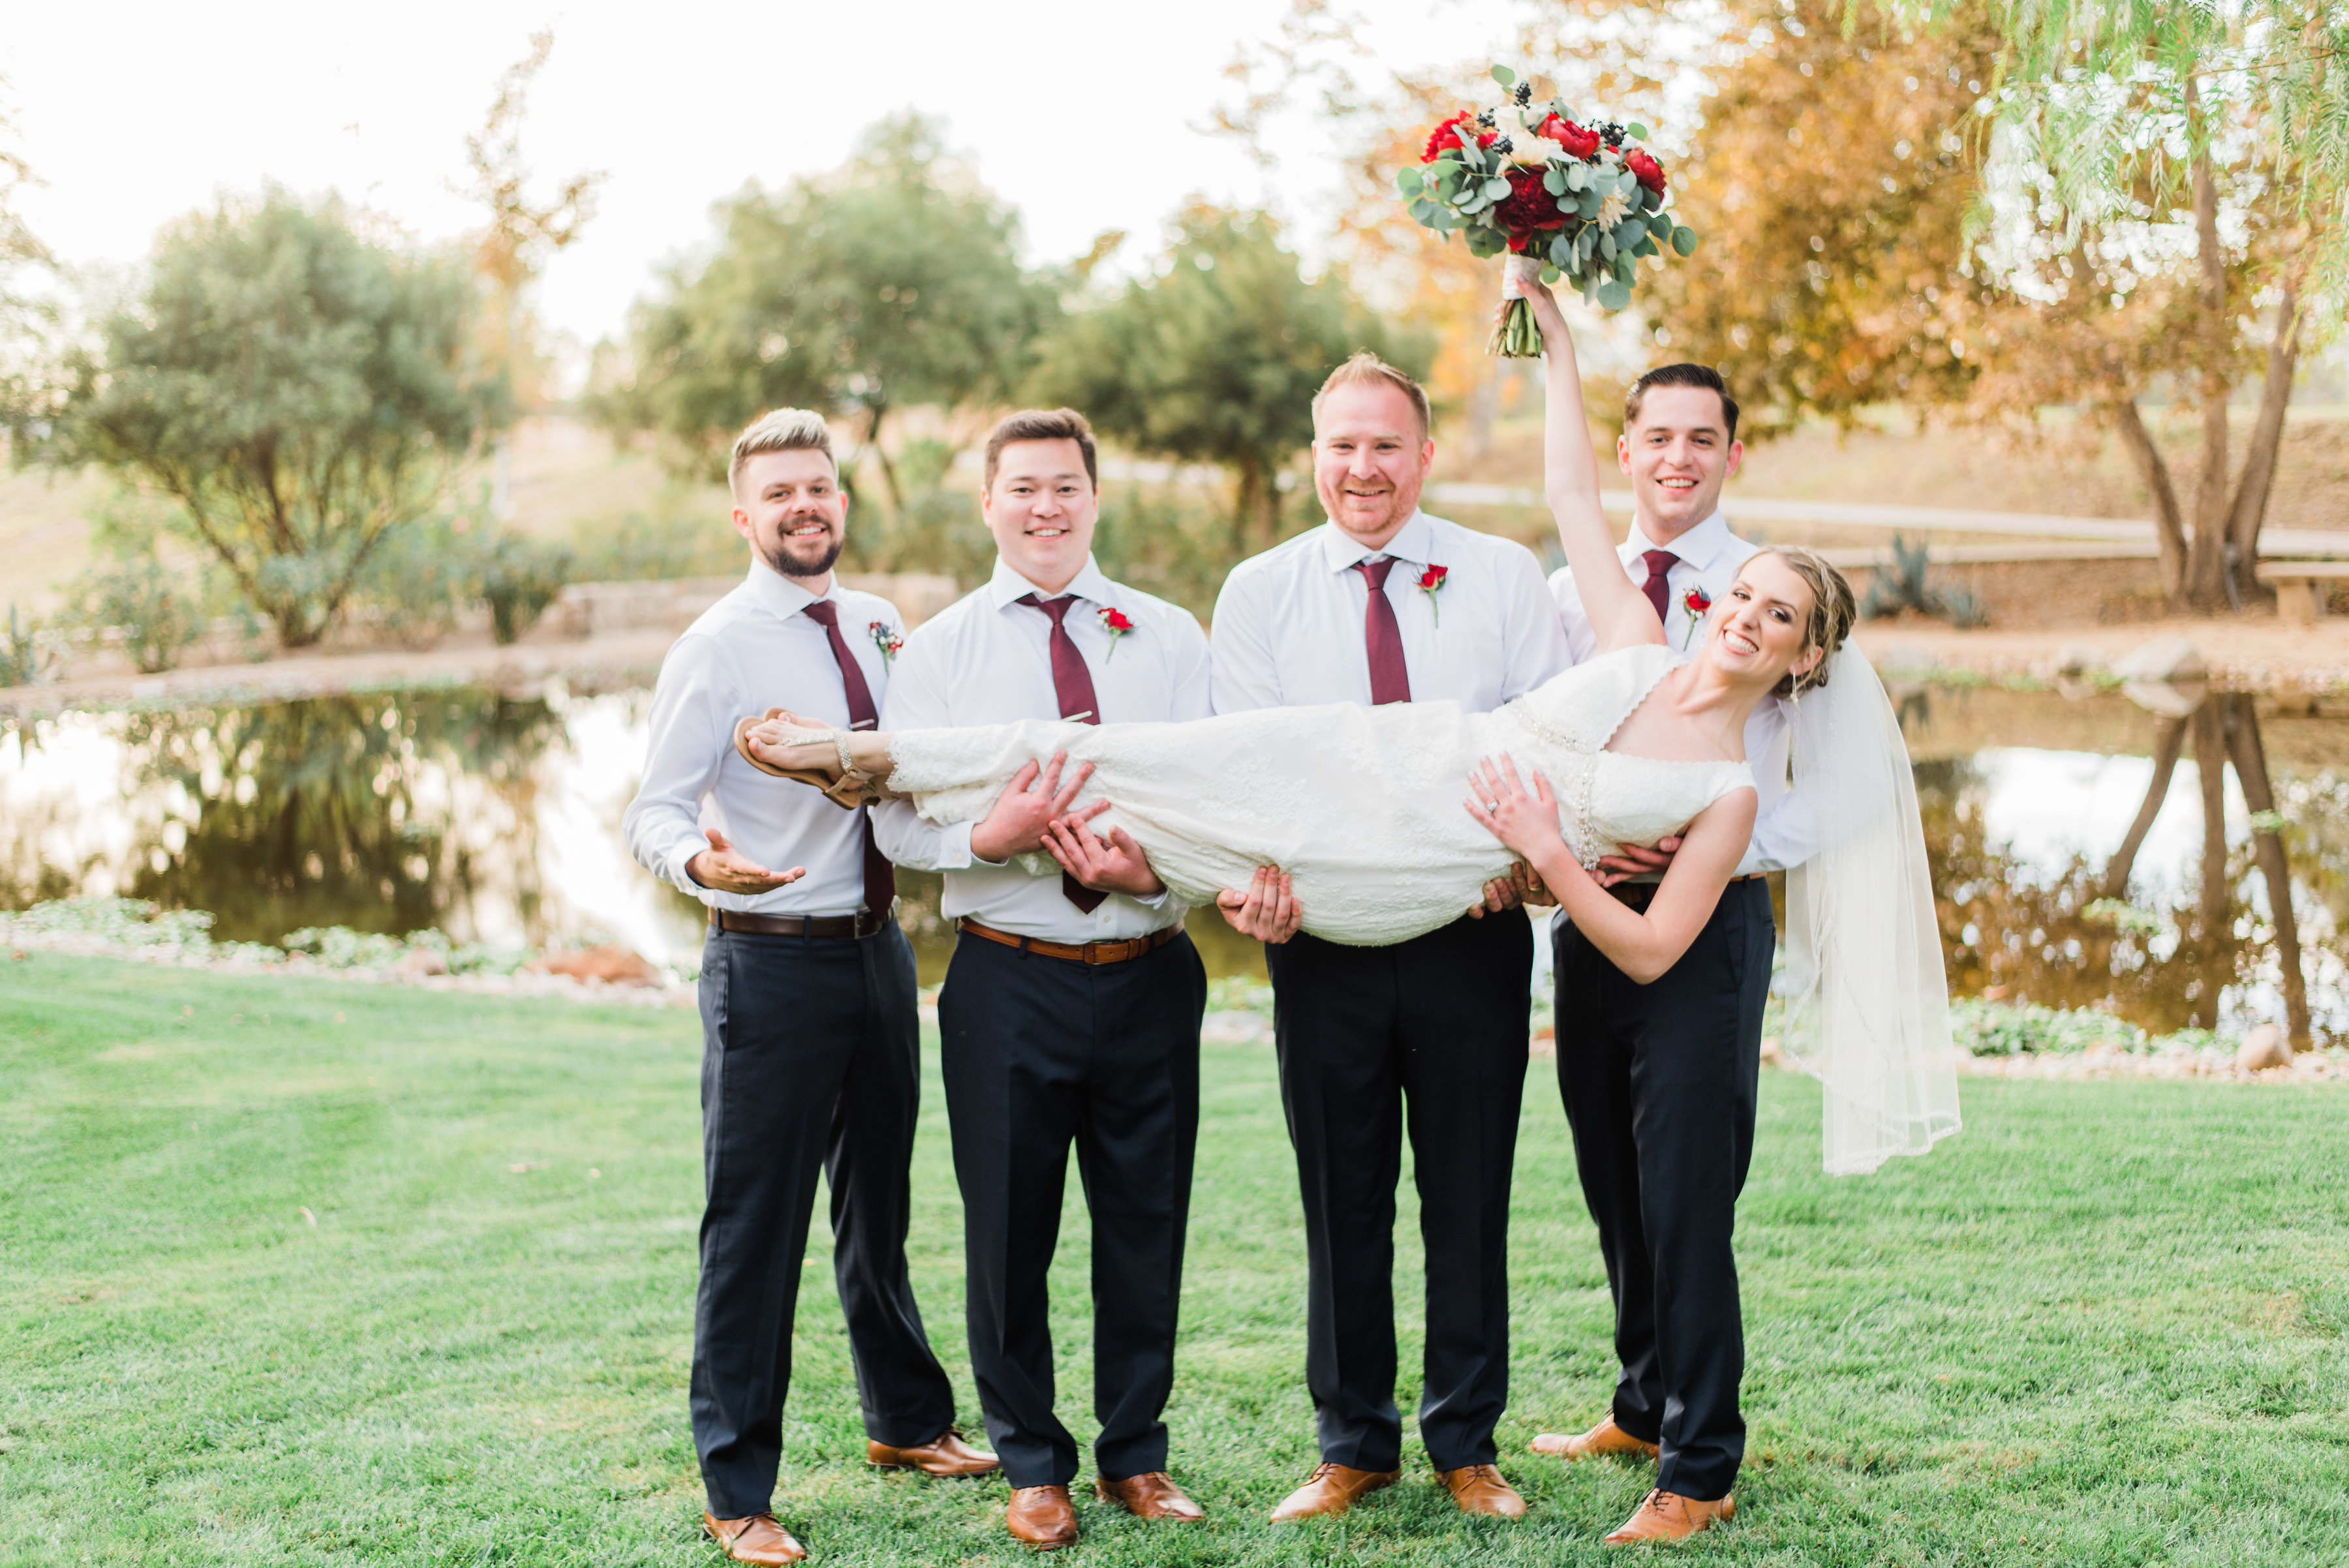 Putting Me (and Your Bridal Party) on the Spot: “Quick, think of something  to do for intros!” | Kristen Wynn Photography